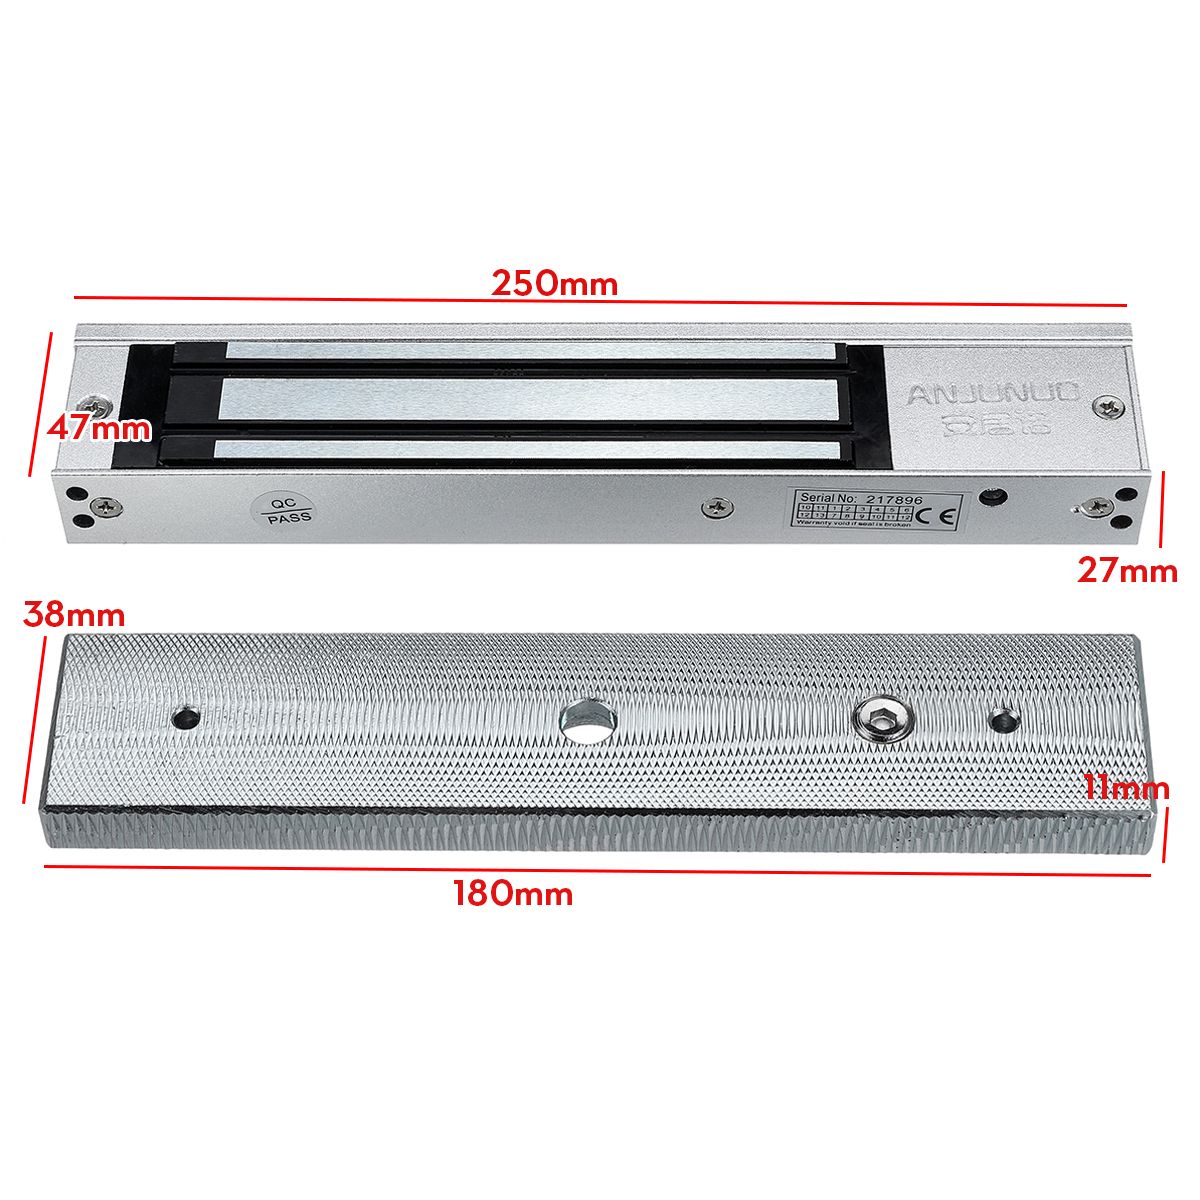 12V-Electric-Magnetic-Lock-280KG-600Lbs-Holding-Force-Door-Entry-Access-Control-Security-Lock-Electr-1587168